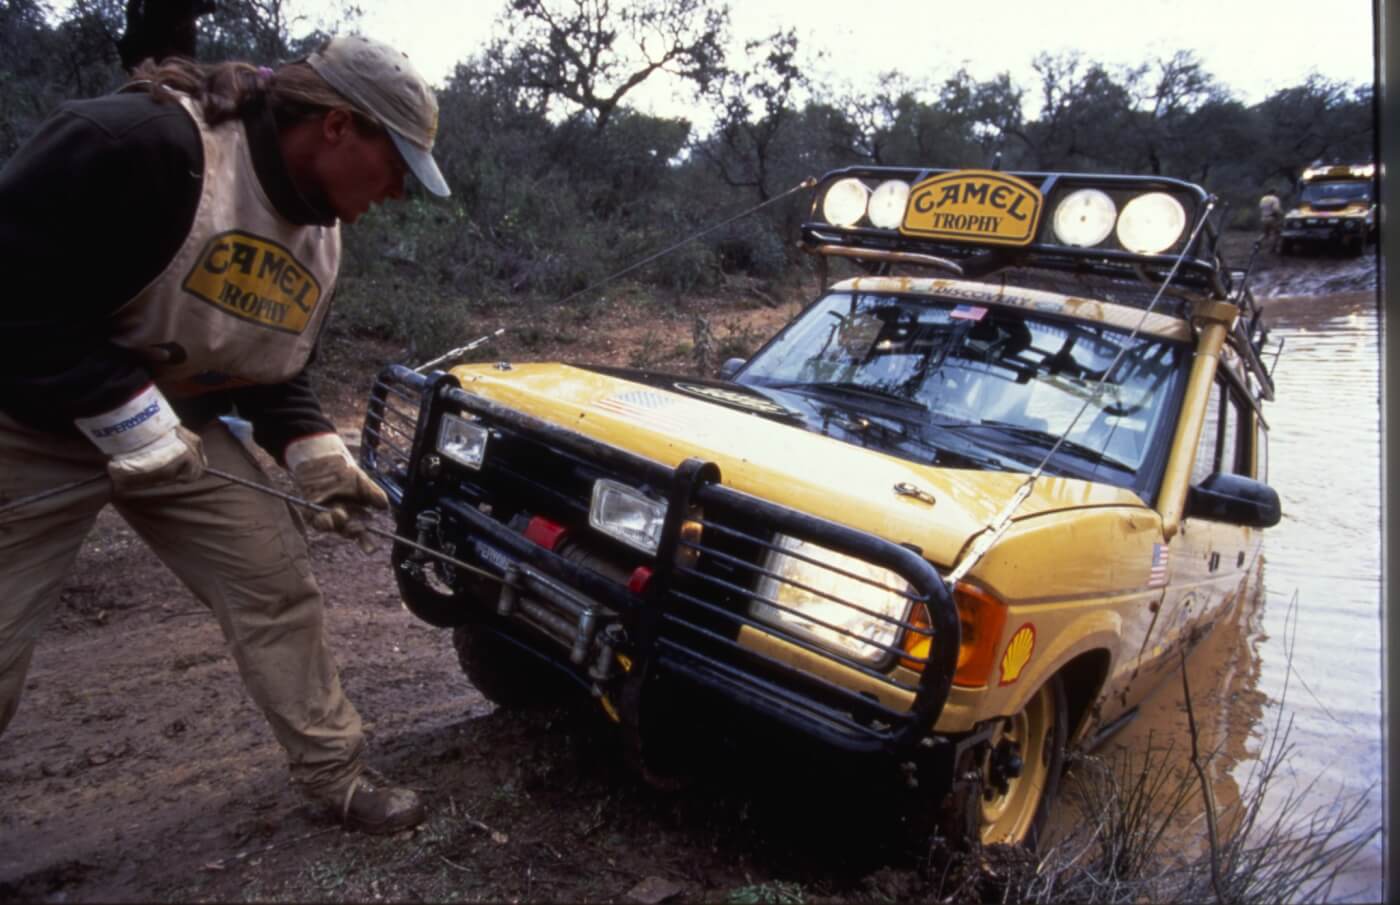 A good many times, the Discoveries operated in wet environments. With their heavy loads, open diffs, and completely inhospitable terrain, winching and towing were commonly used skills. Here Ken Cameron from the 1996 event in Indonesia is shown training in Colorado in 1995 with the USA Team’s Discovery from 1992. This rig was actually lost in a river during training and was completely submerged. It had to be recovered with a diver’s assistance.